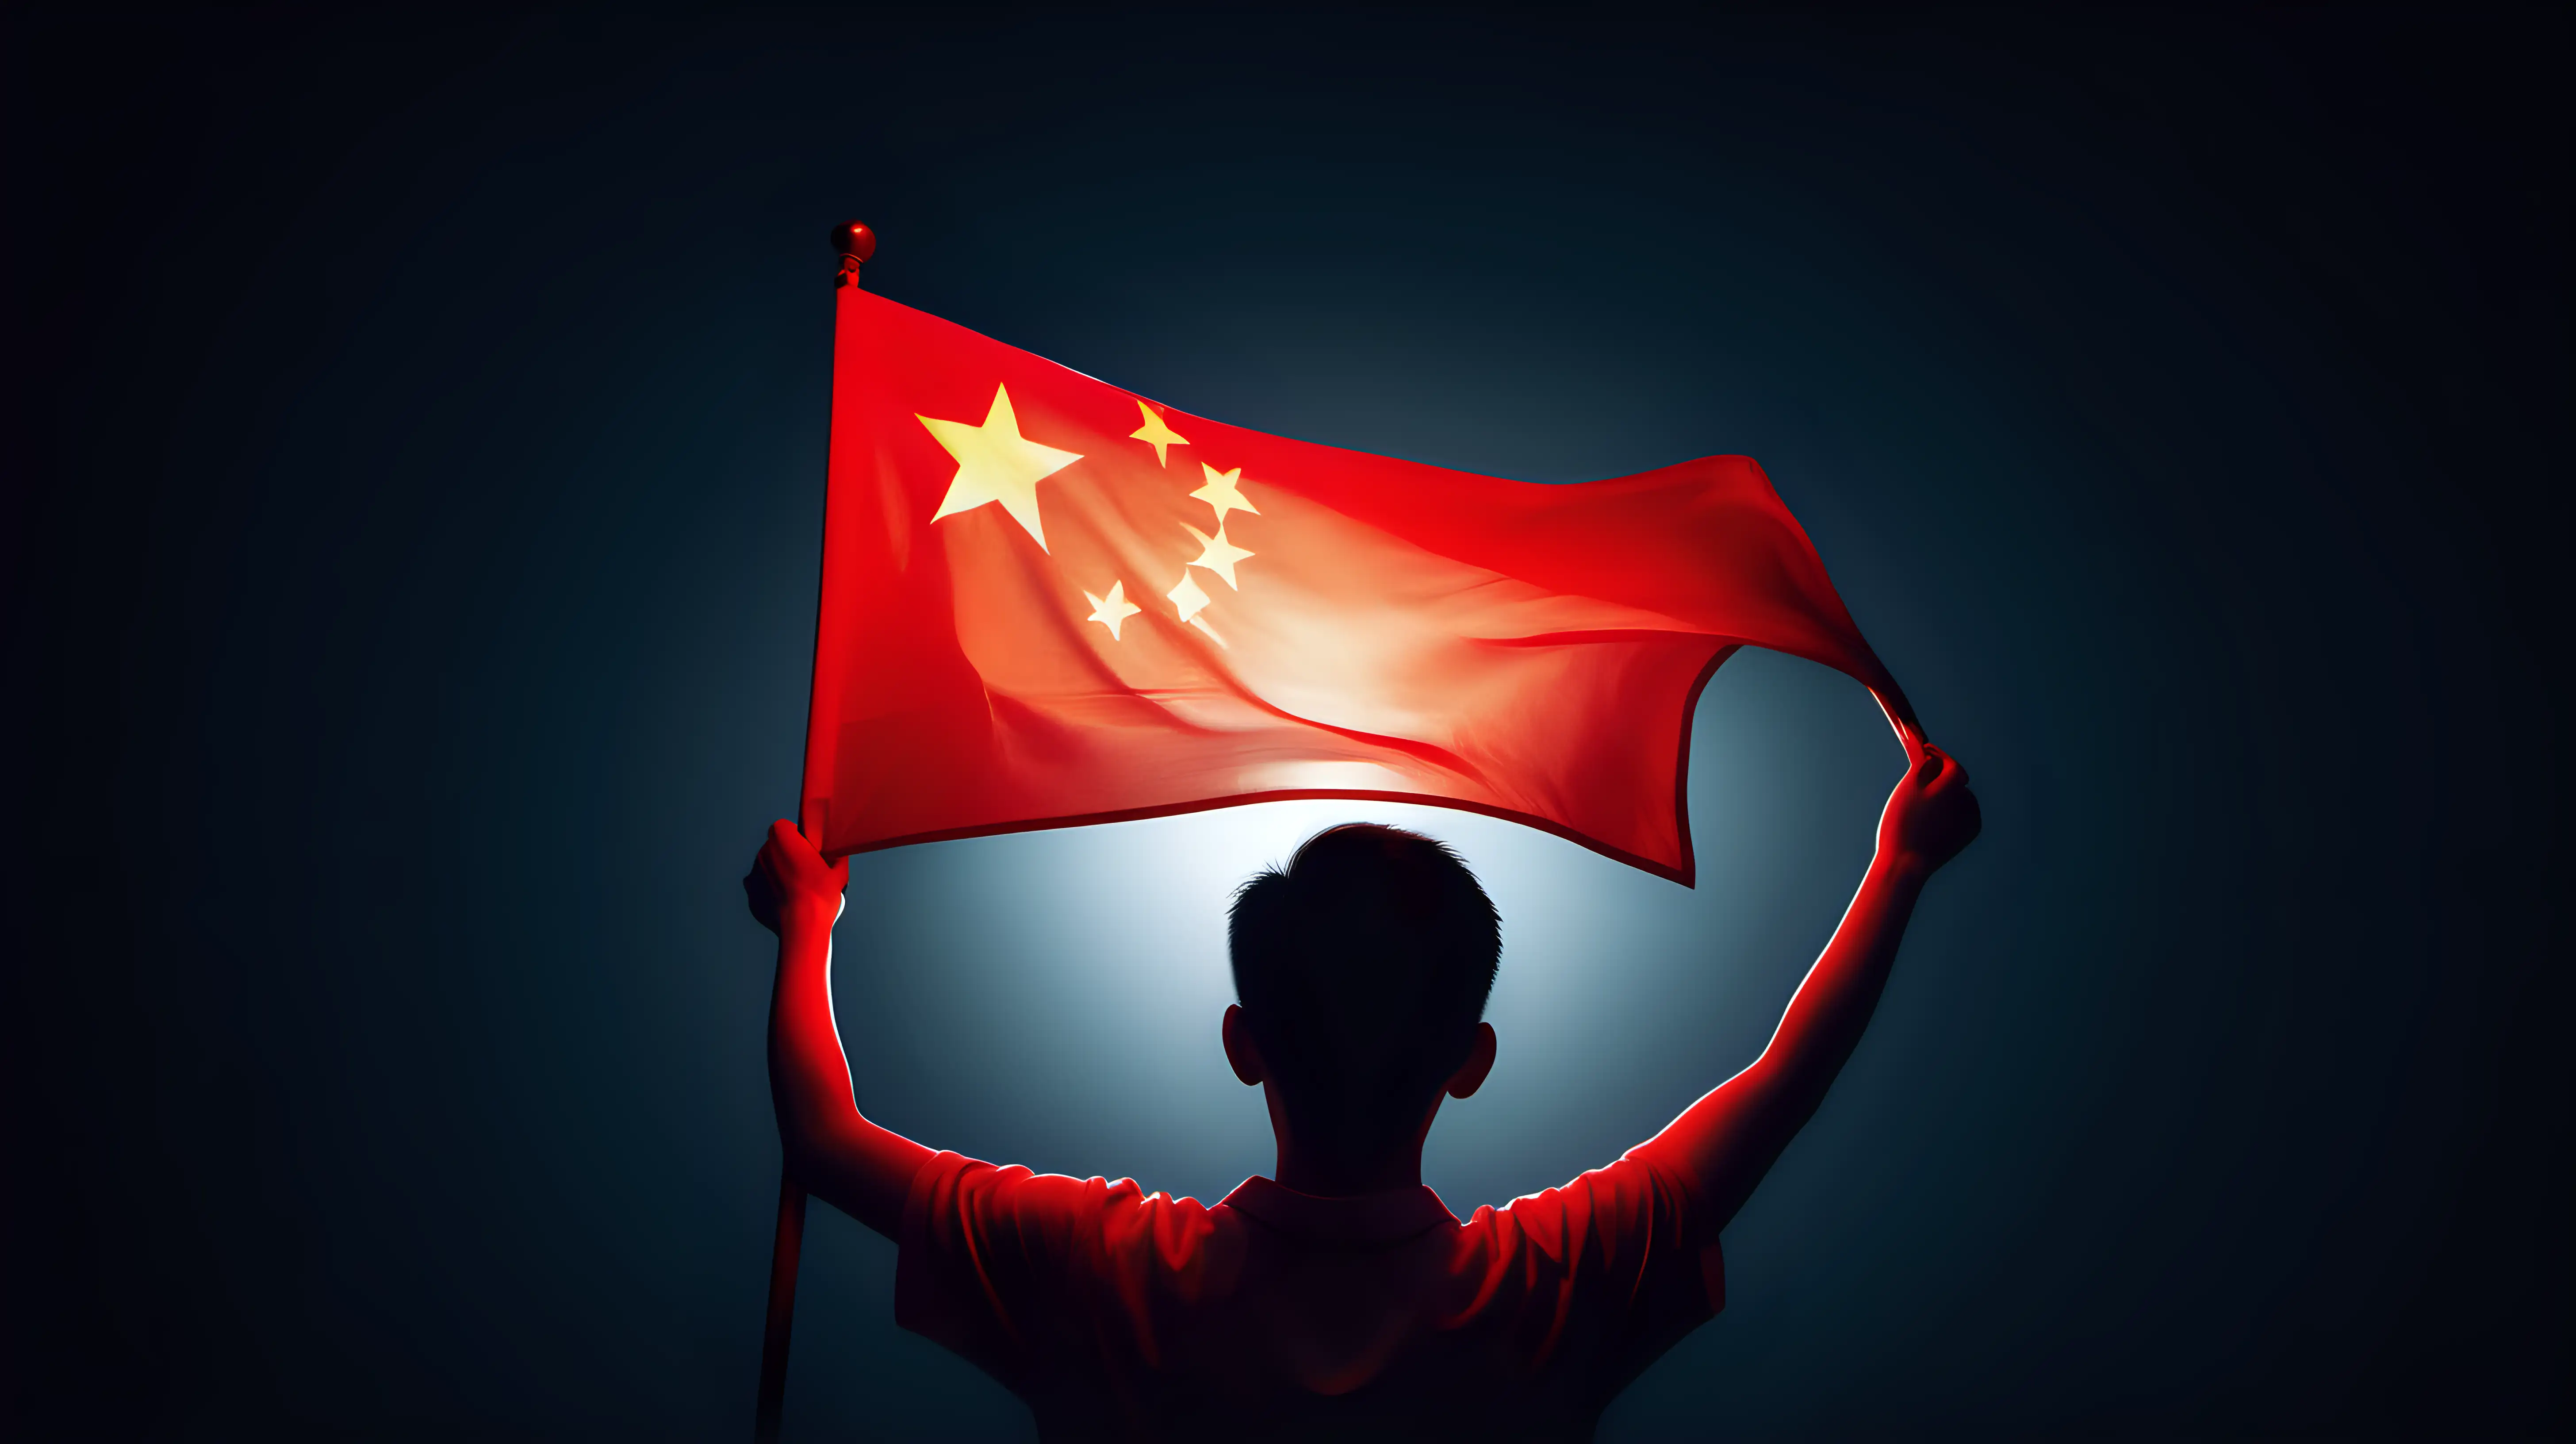 Radiant Chinese Flag Held in Hands Symbolizing Patriotism in Darkness